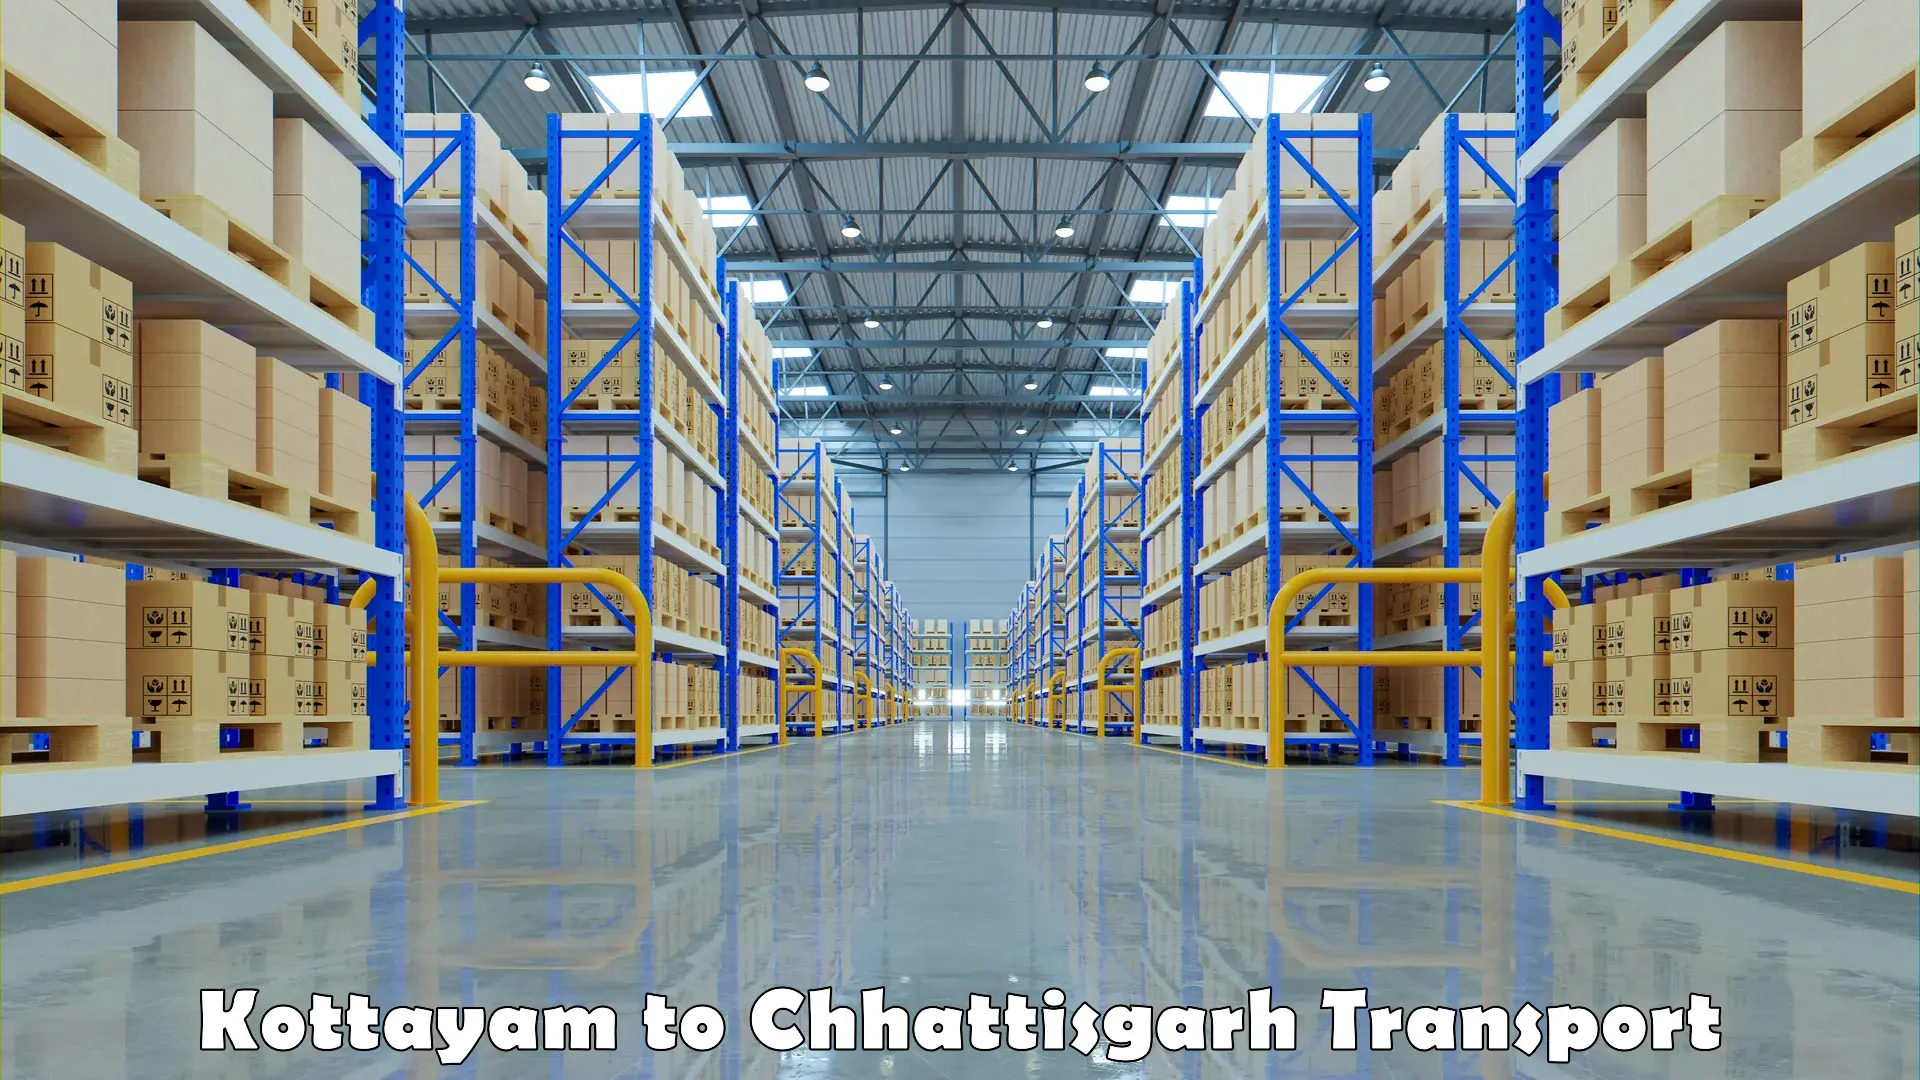 Air freight transport services Kottayam to Raigarh